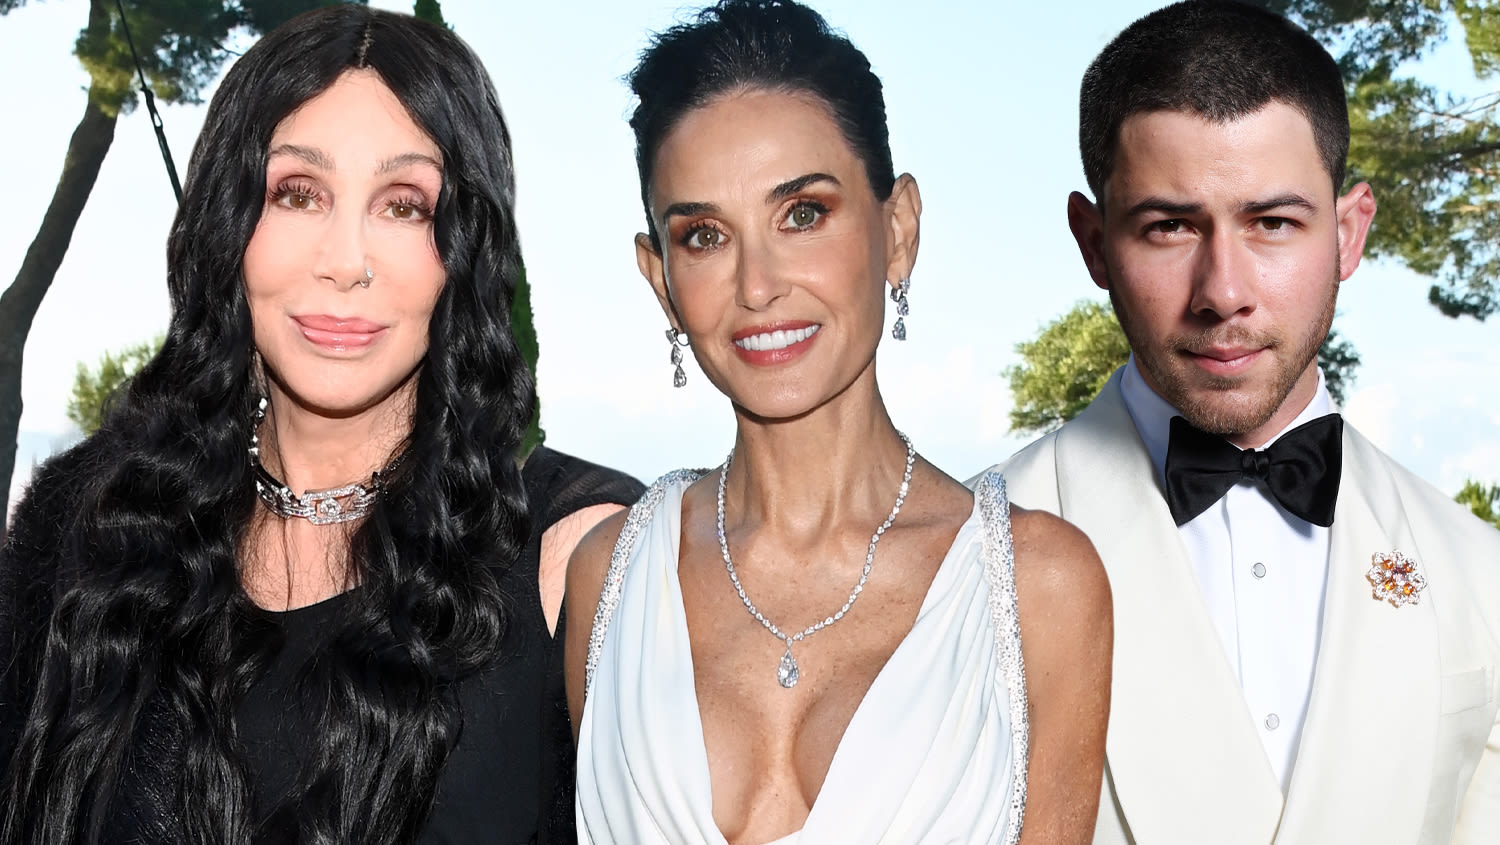 ... By The Ocean: Demi Moore Hosted Event Raises $16M And Roof With Nick & Joe Jonas, Cher Performances